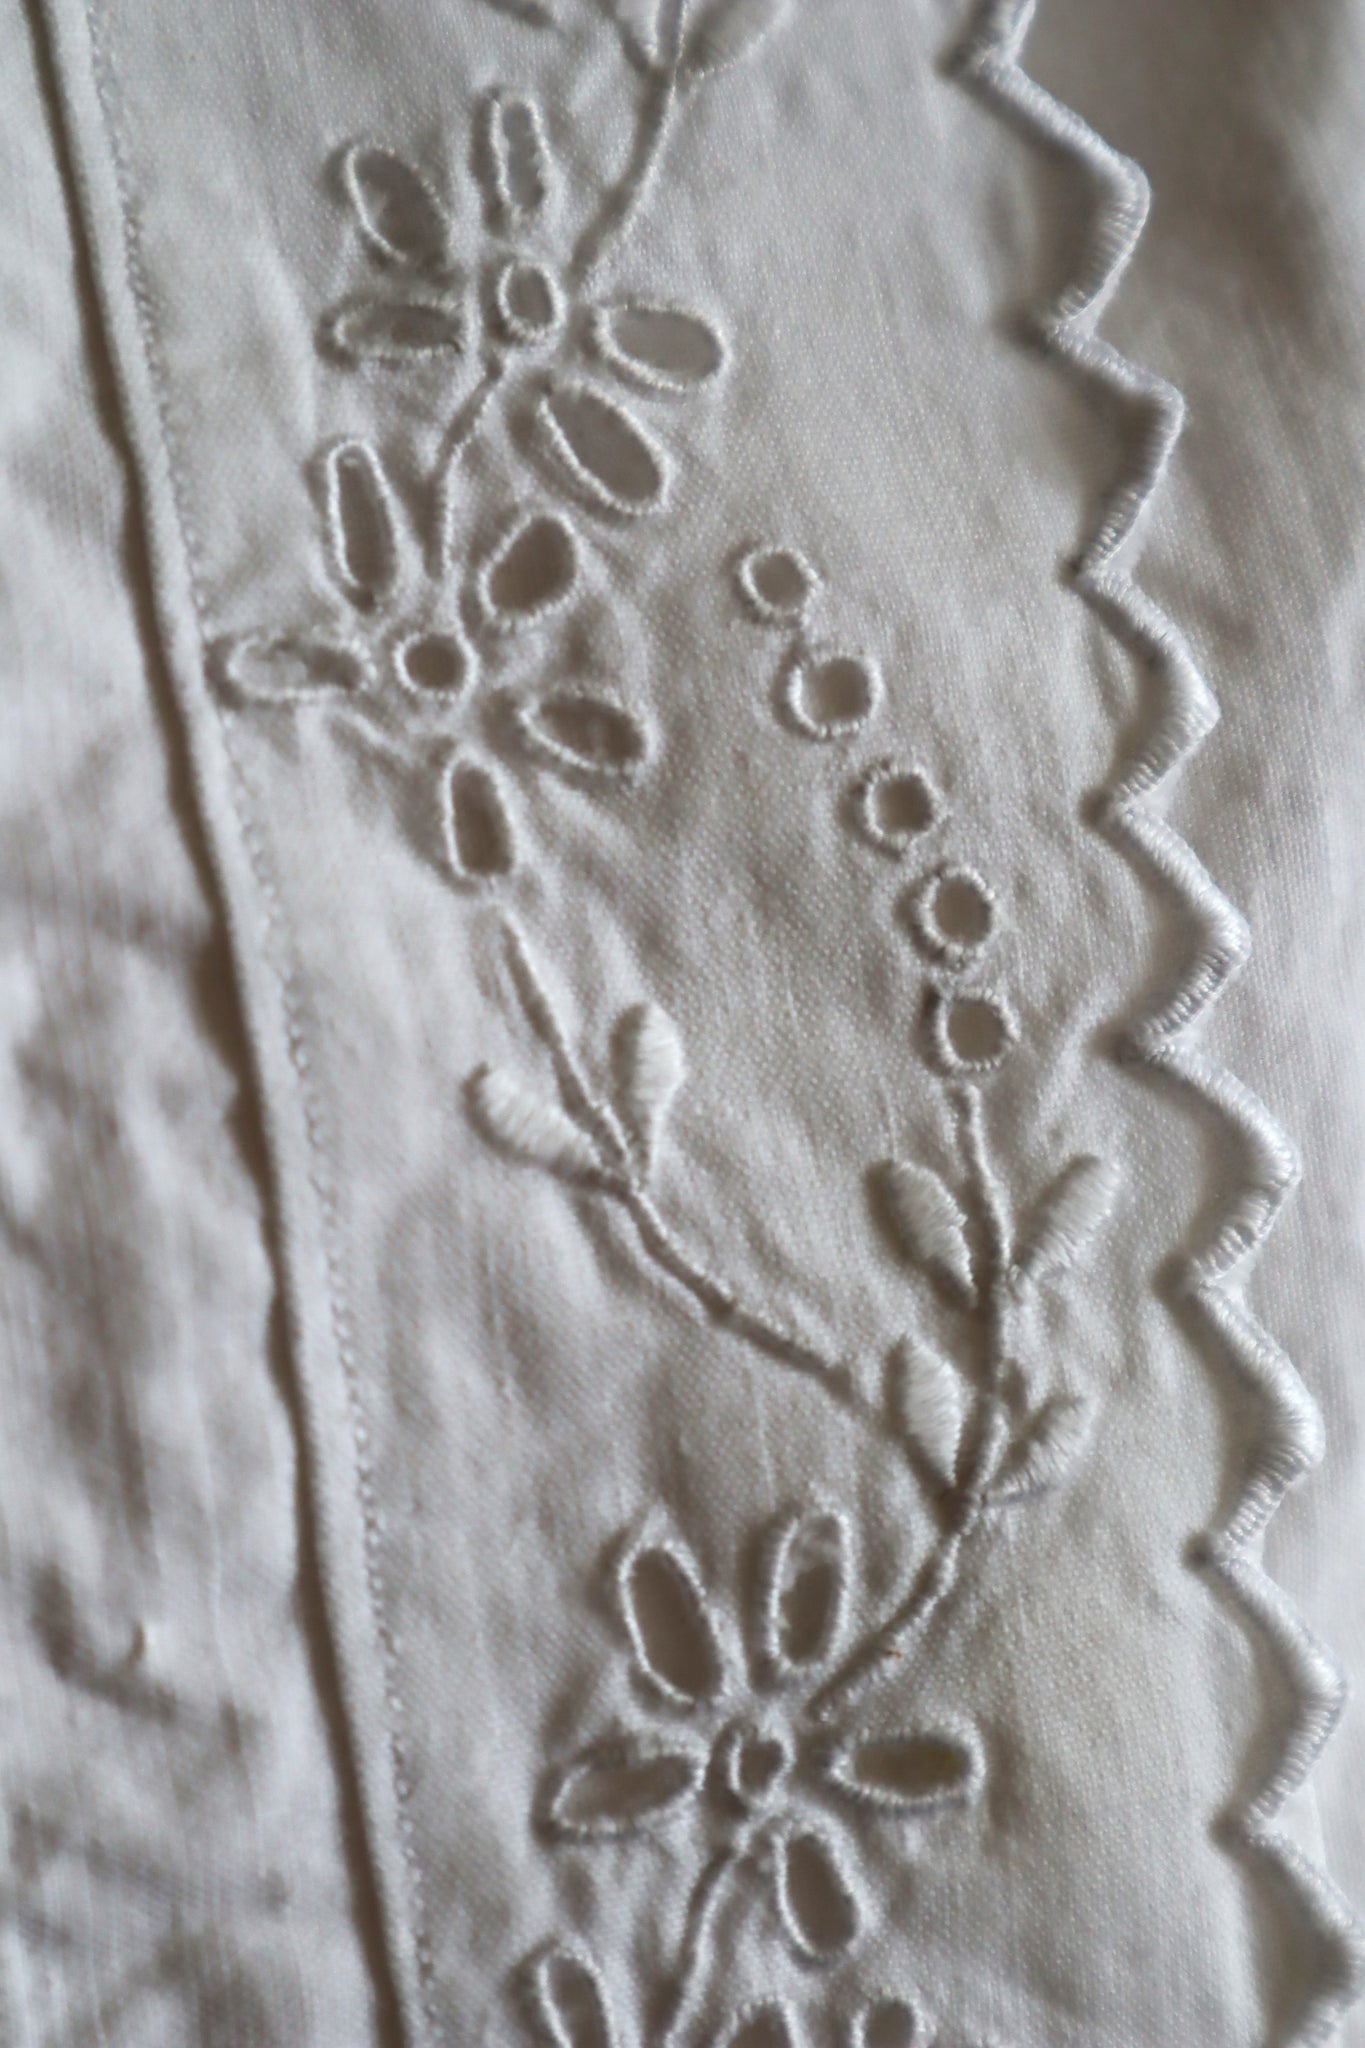 1920s Embroidered Flower Cut Work Lace Blouse